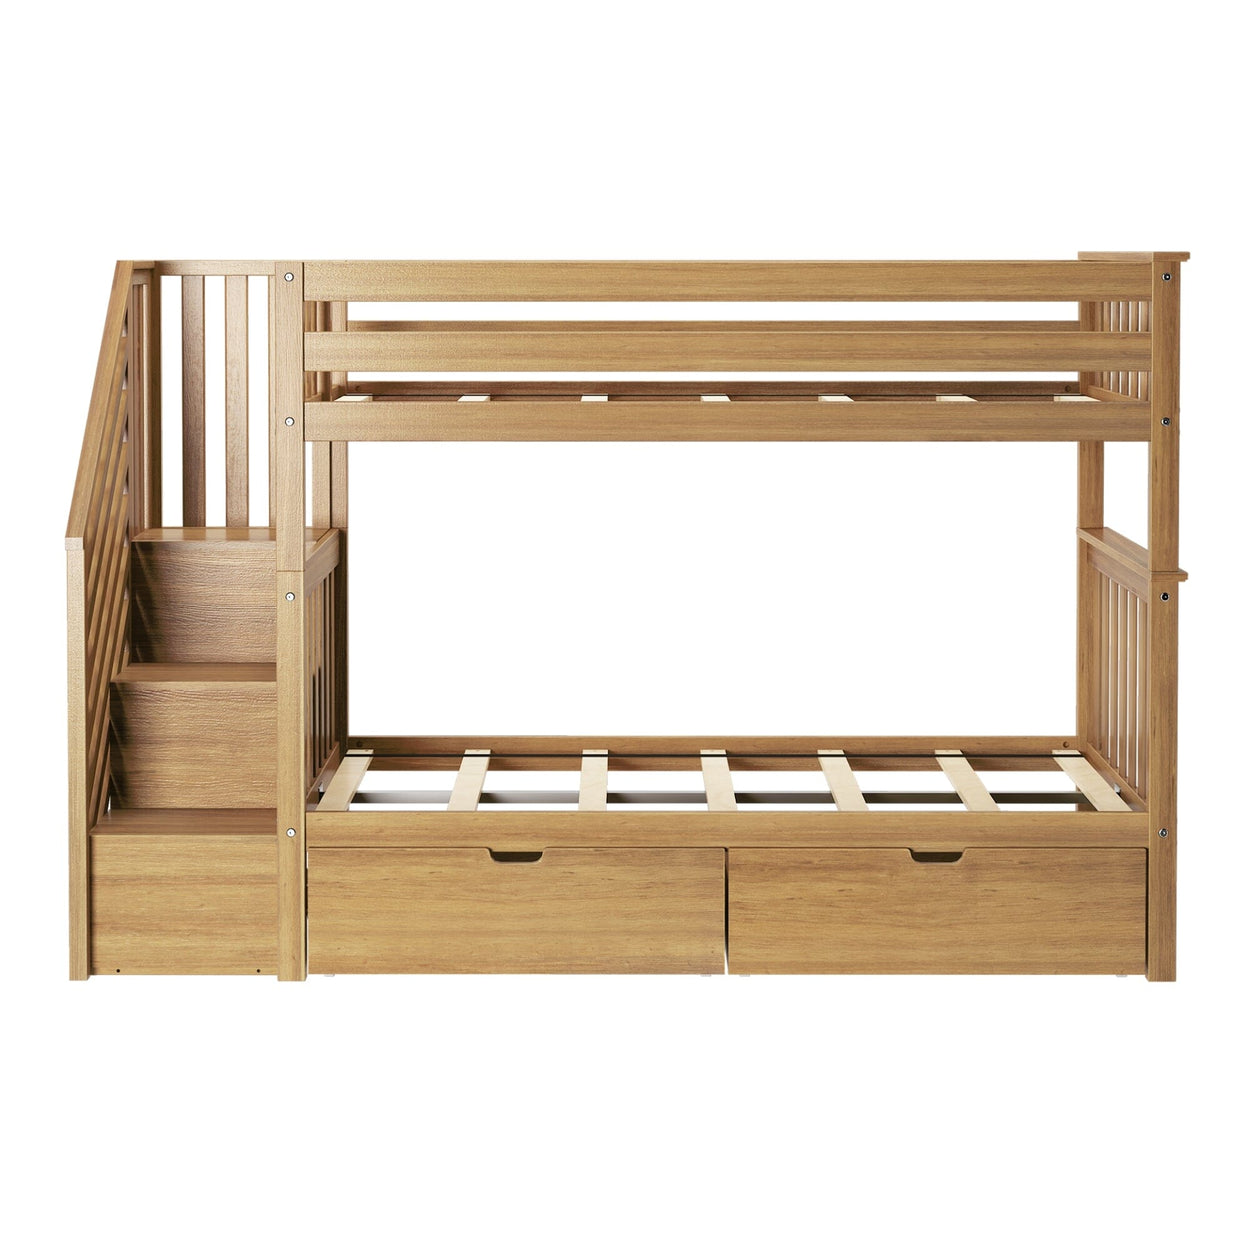 187205-007 : Bunk Beds Twin over Twin Staircase Bunk with Storage Drawers, Pecan